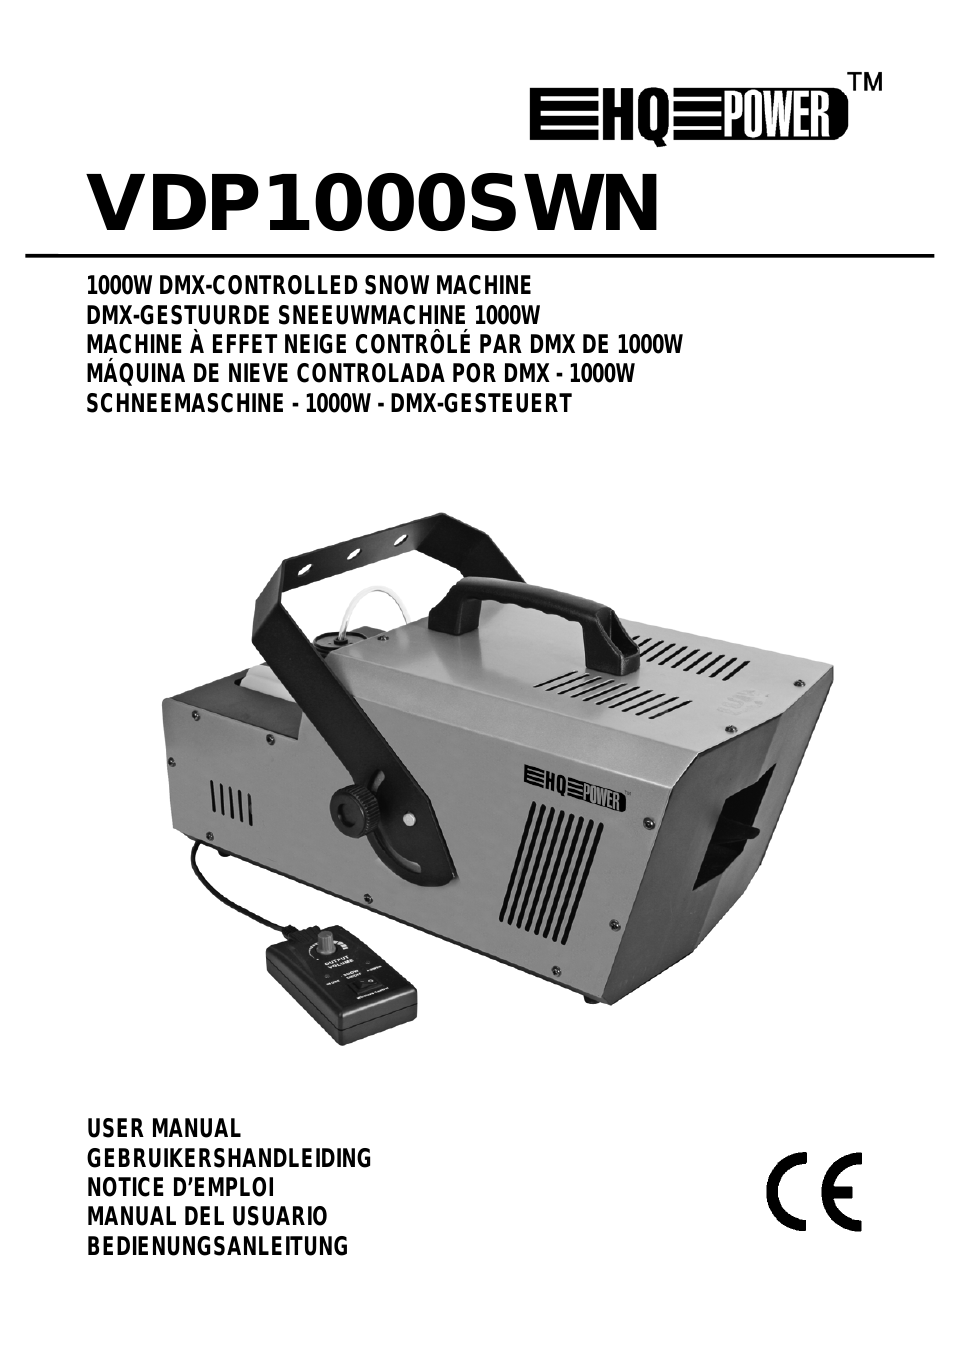 VDP1000SWN